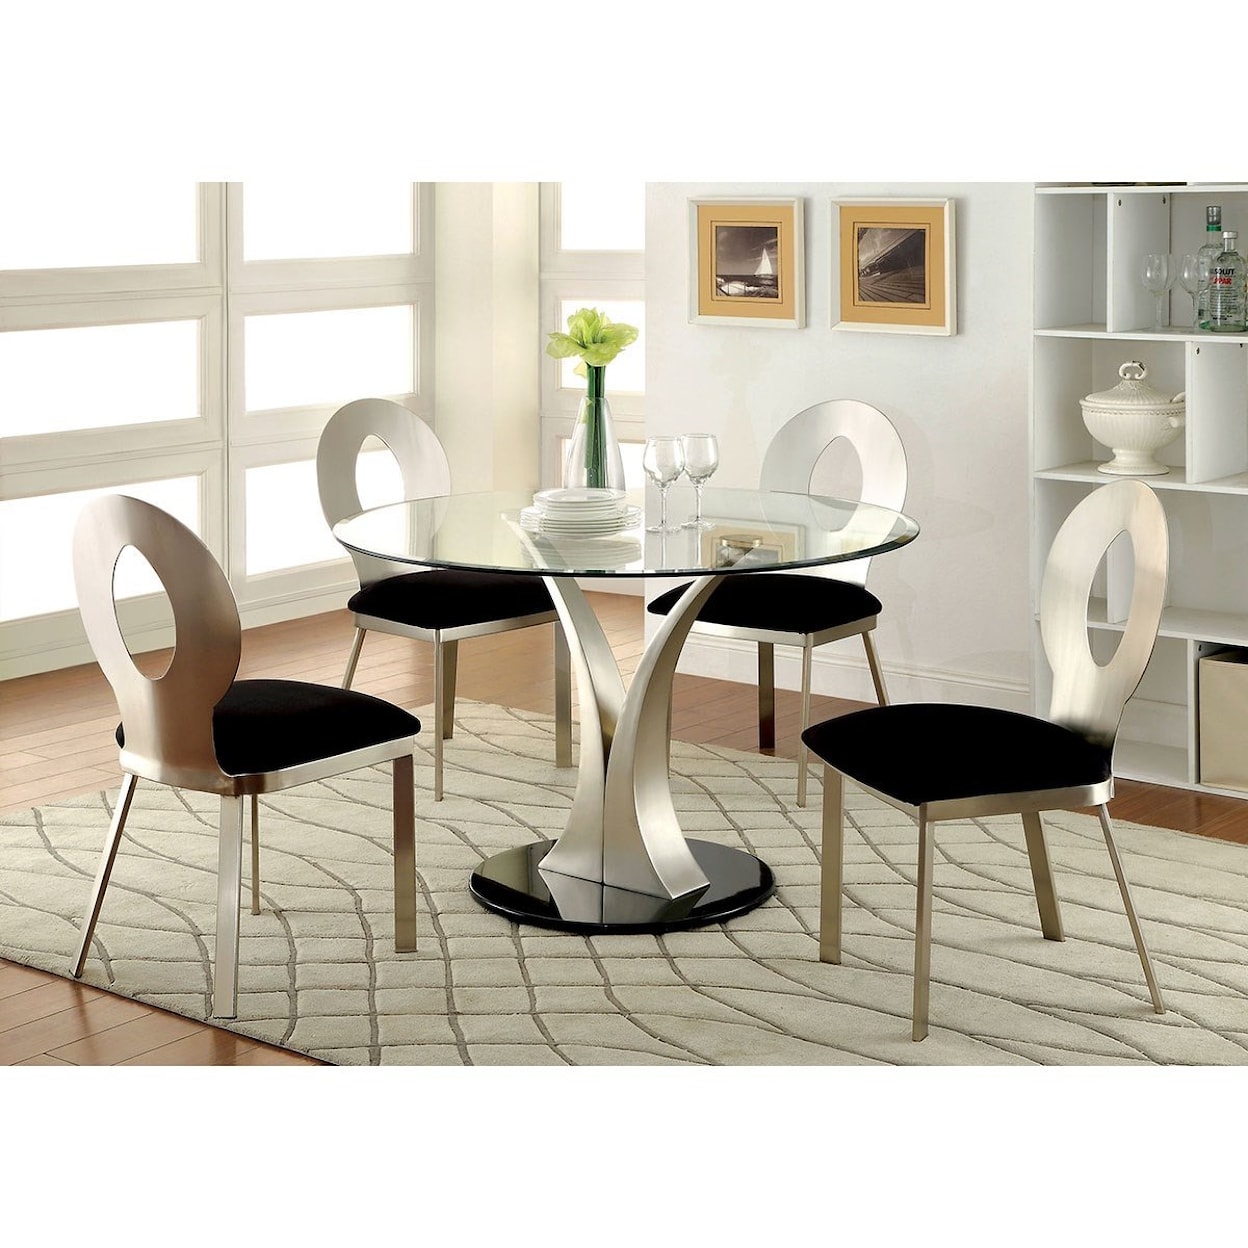 Furniture of America Valo Round Dining Table